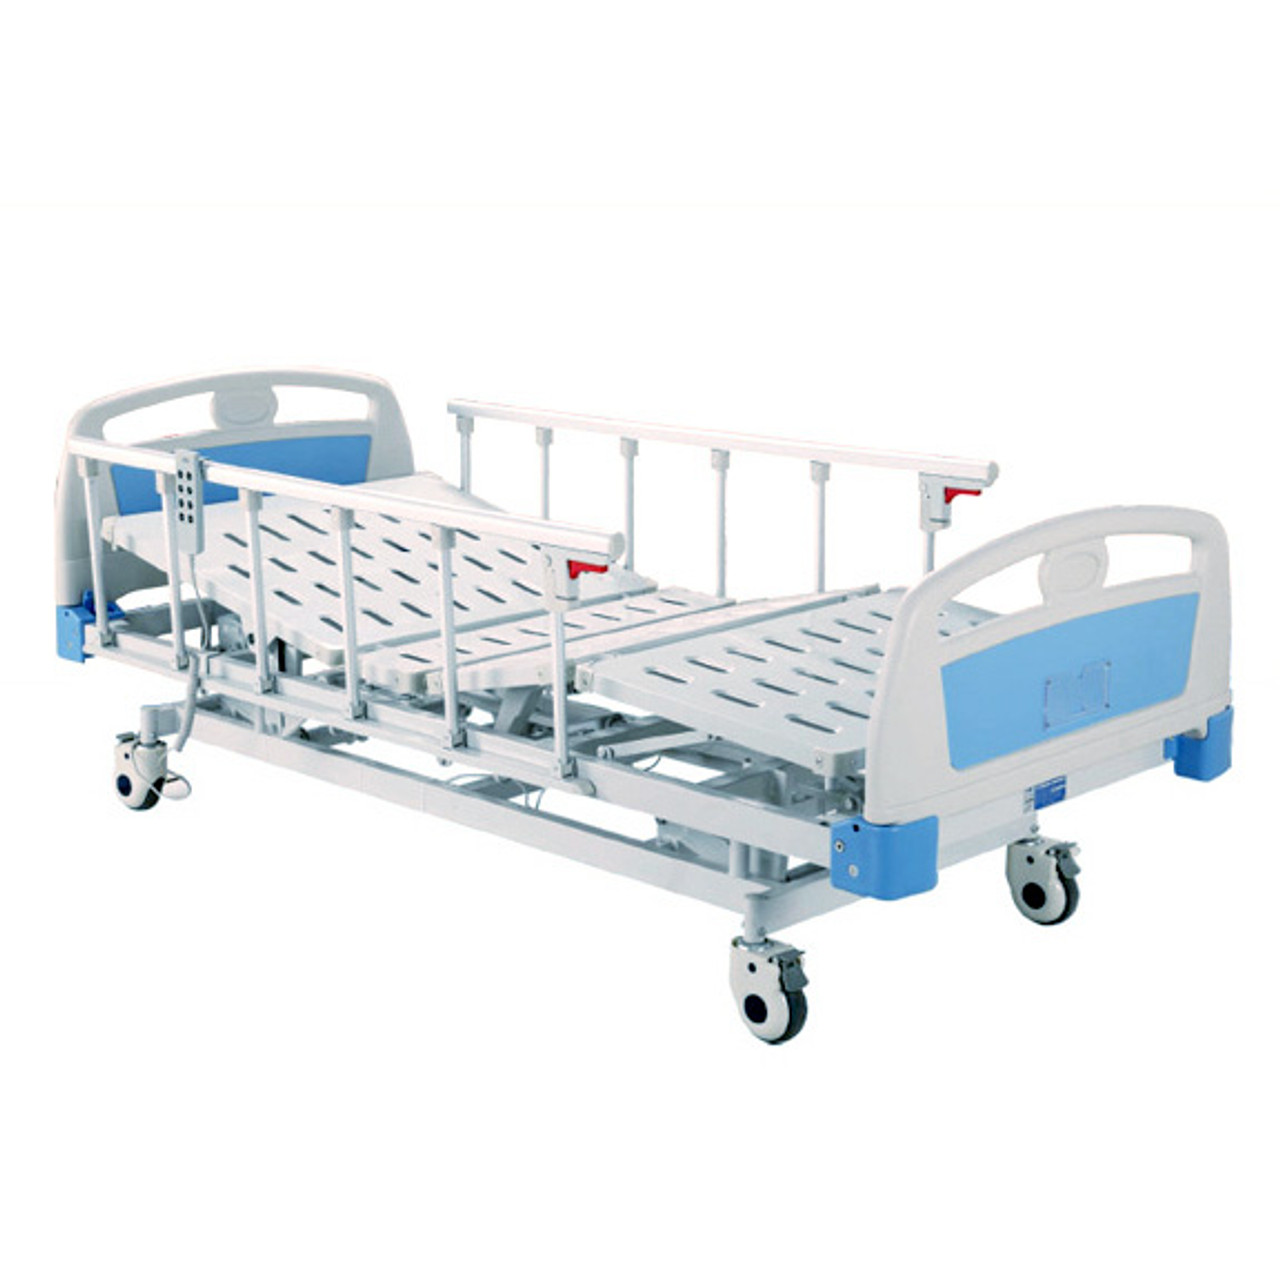 Flexabed High/Low Hospital Bed Features - Electropedic.com